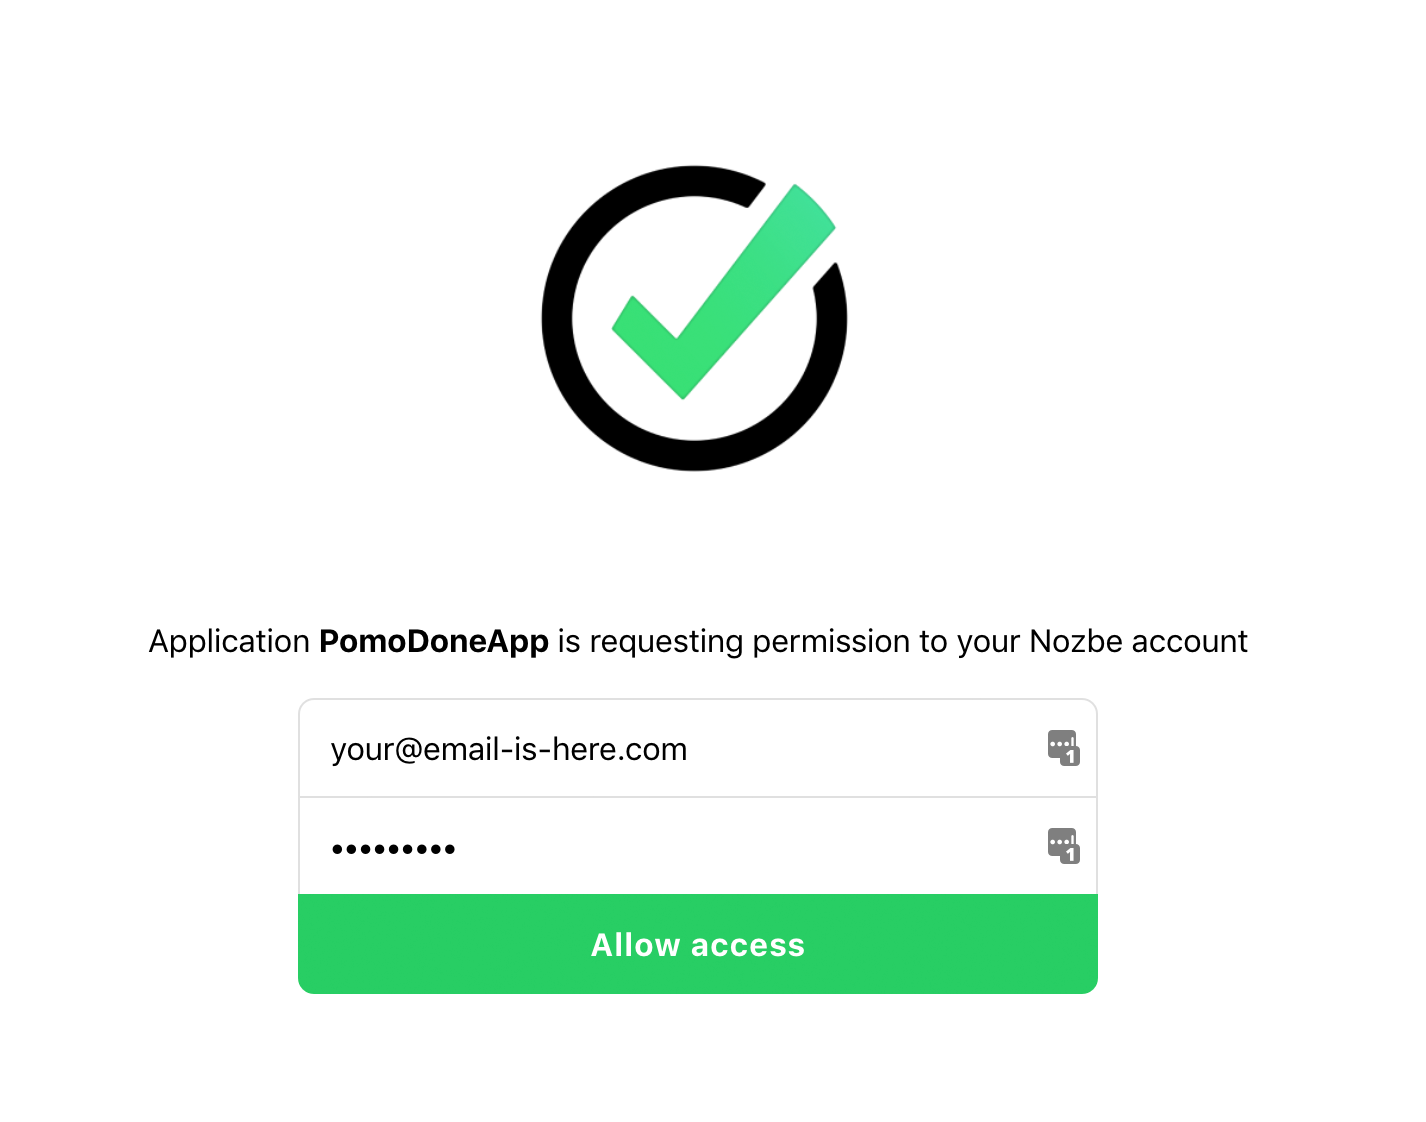 log in to your Nozbe account at the following screen